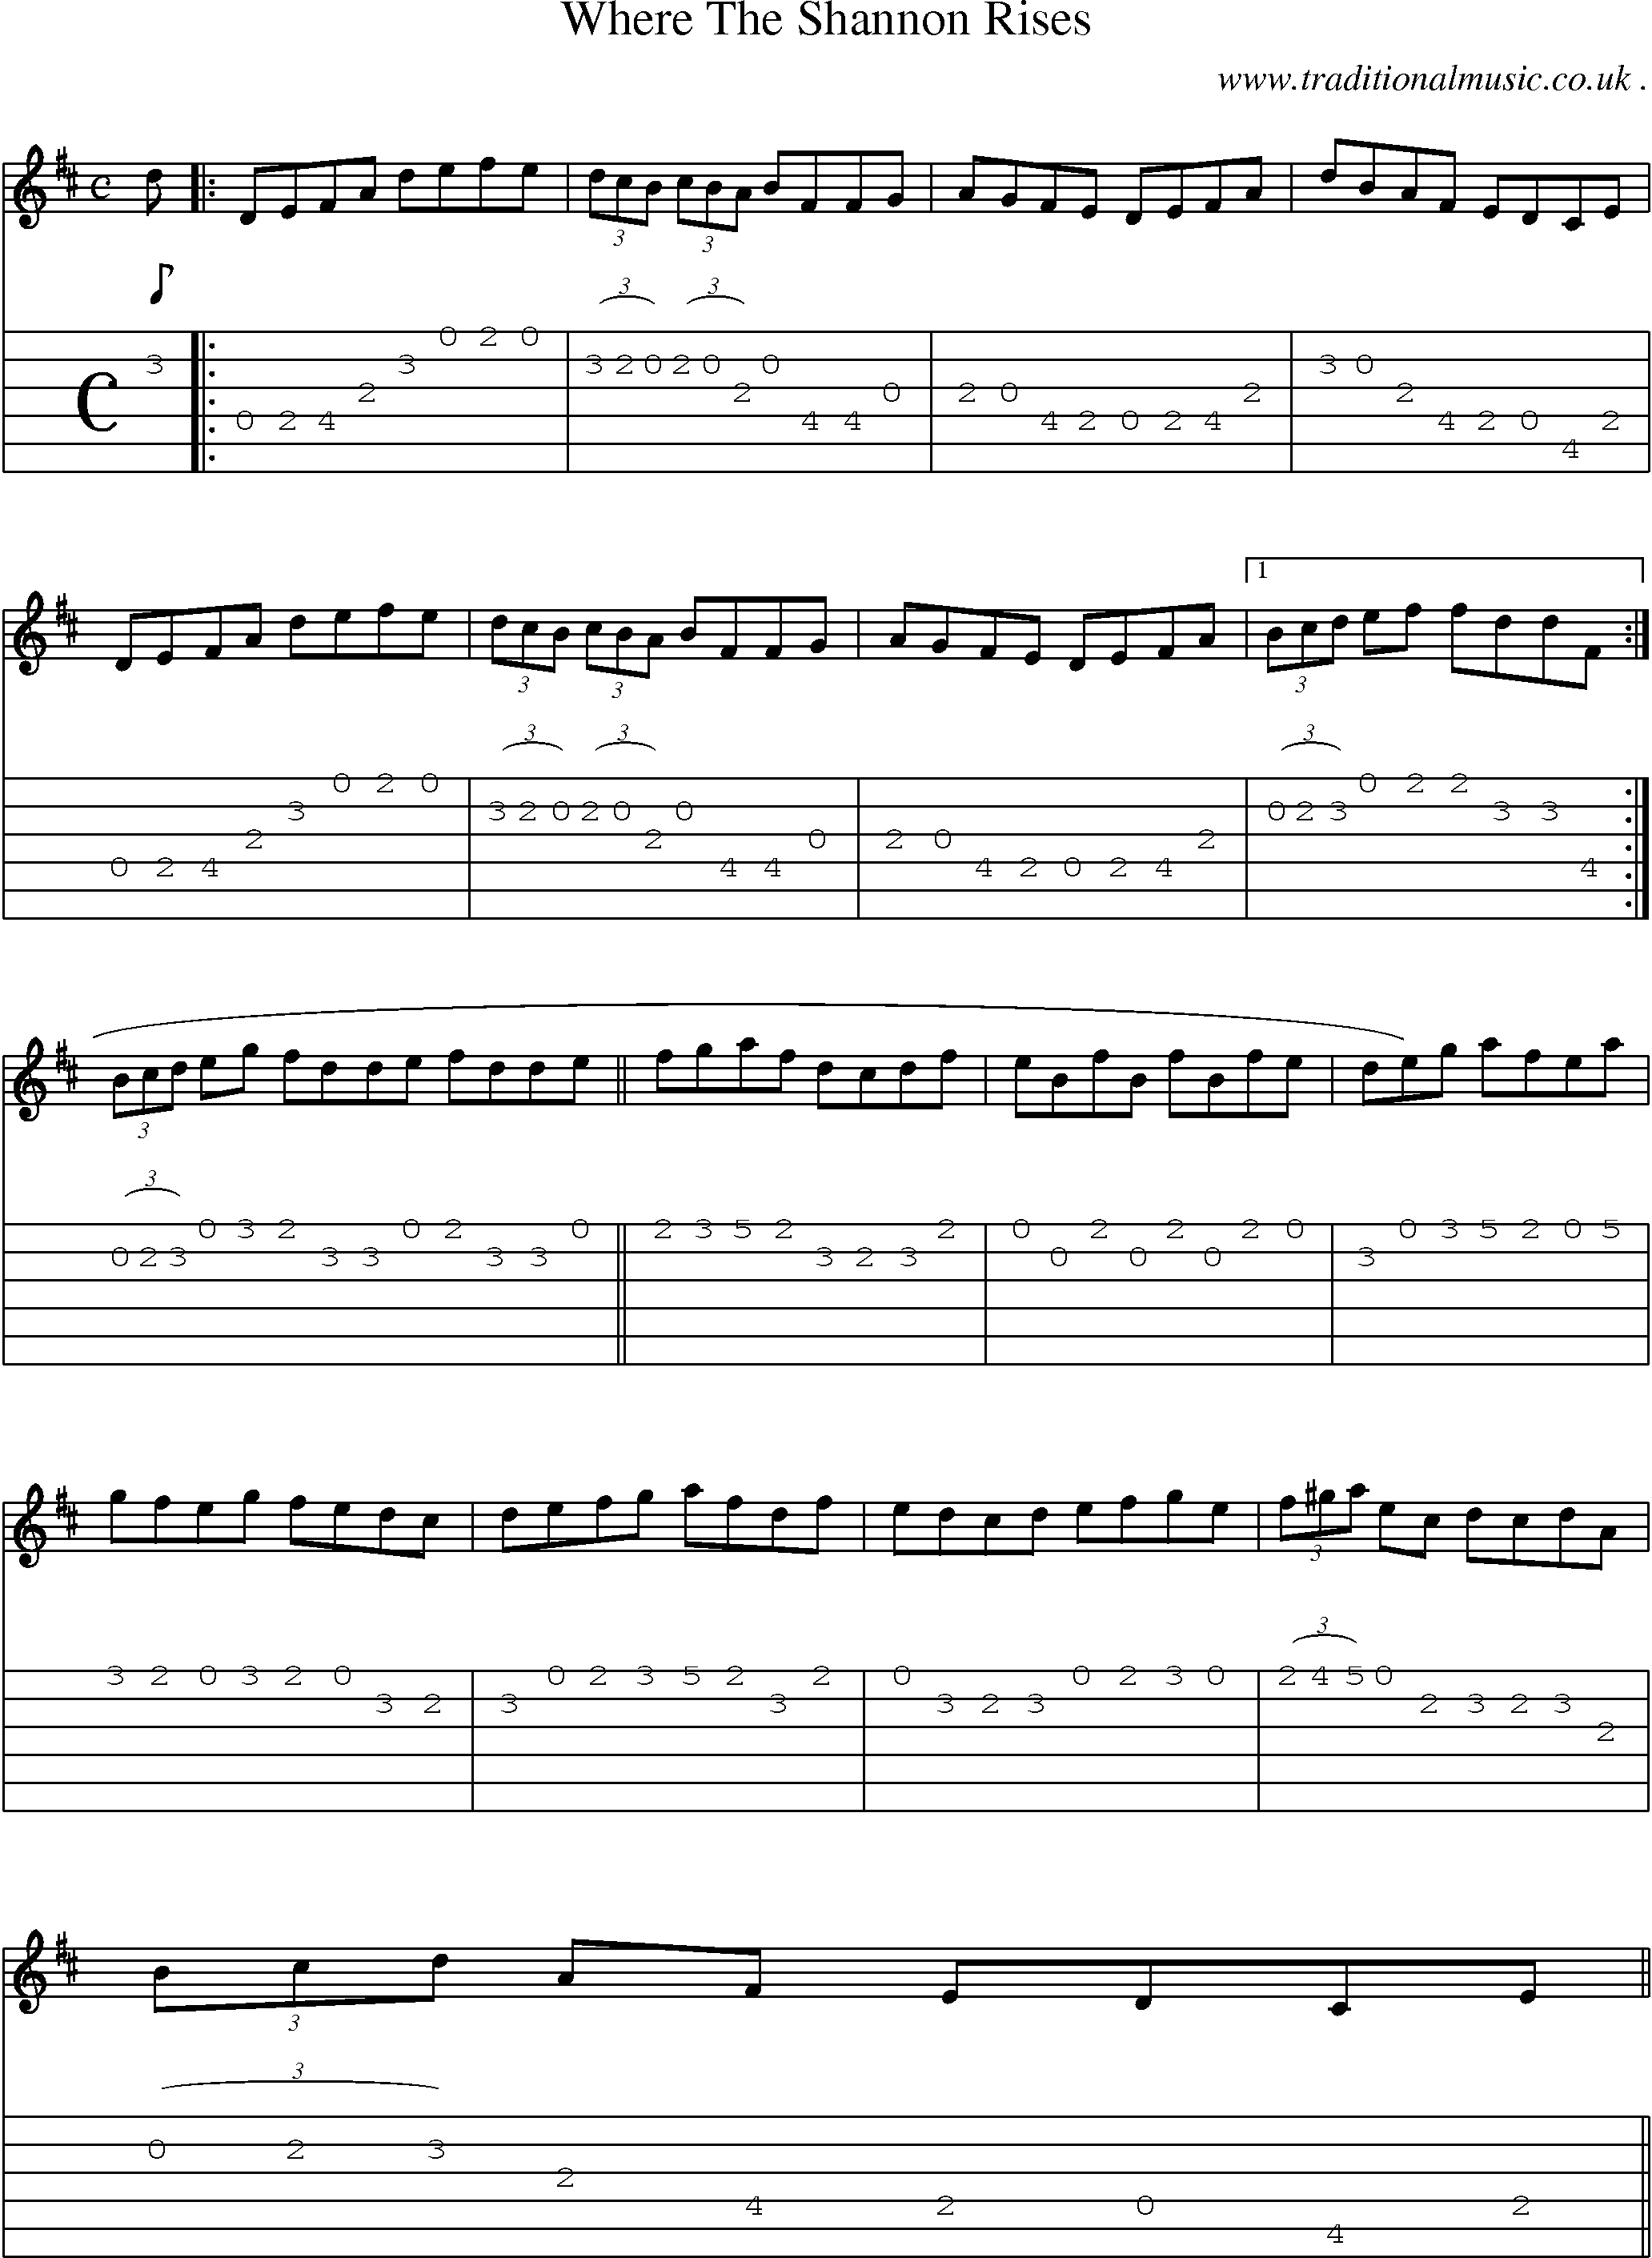 Sheet-Music and Guitar Tabs for Where The Shannon Rises